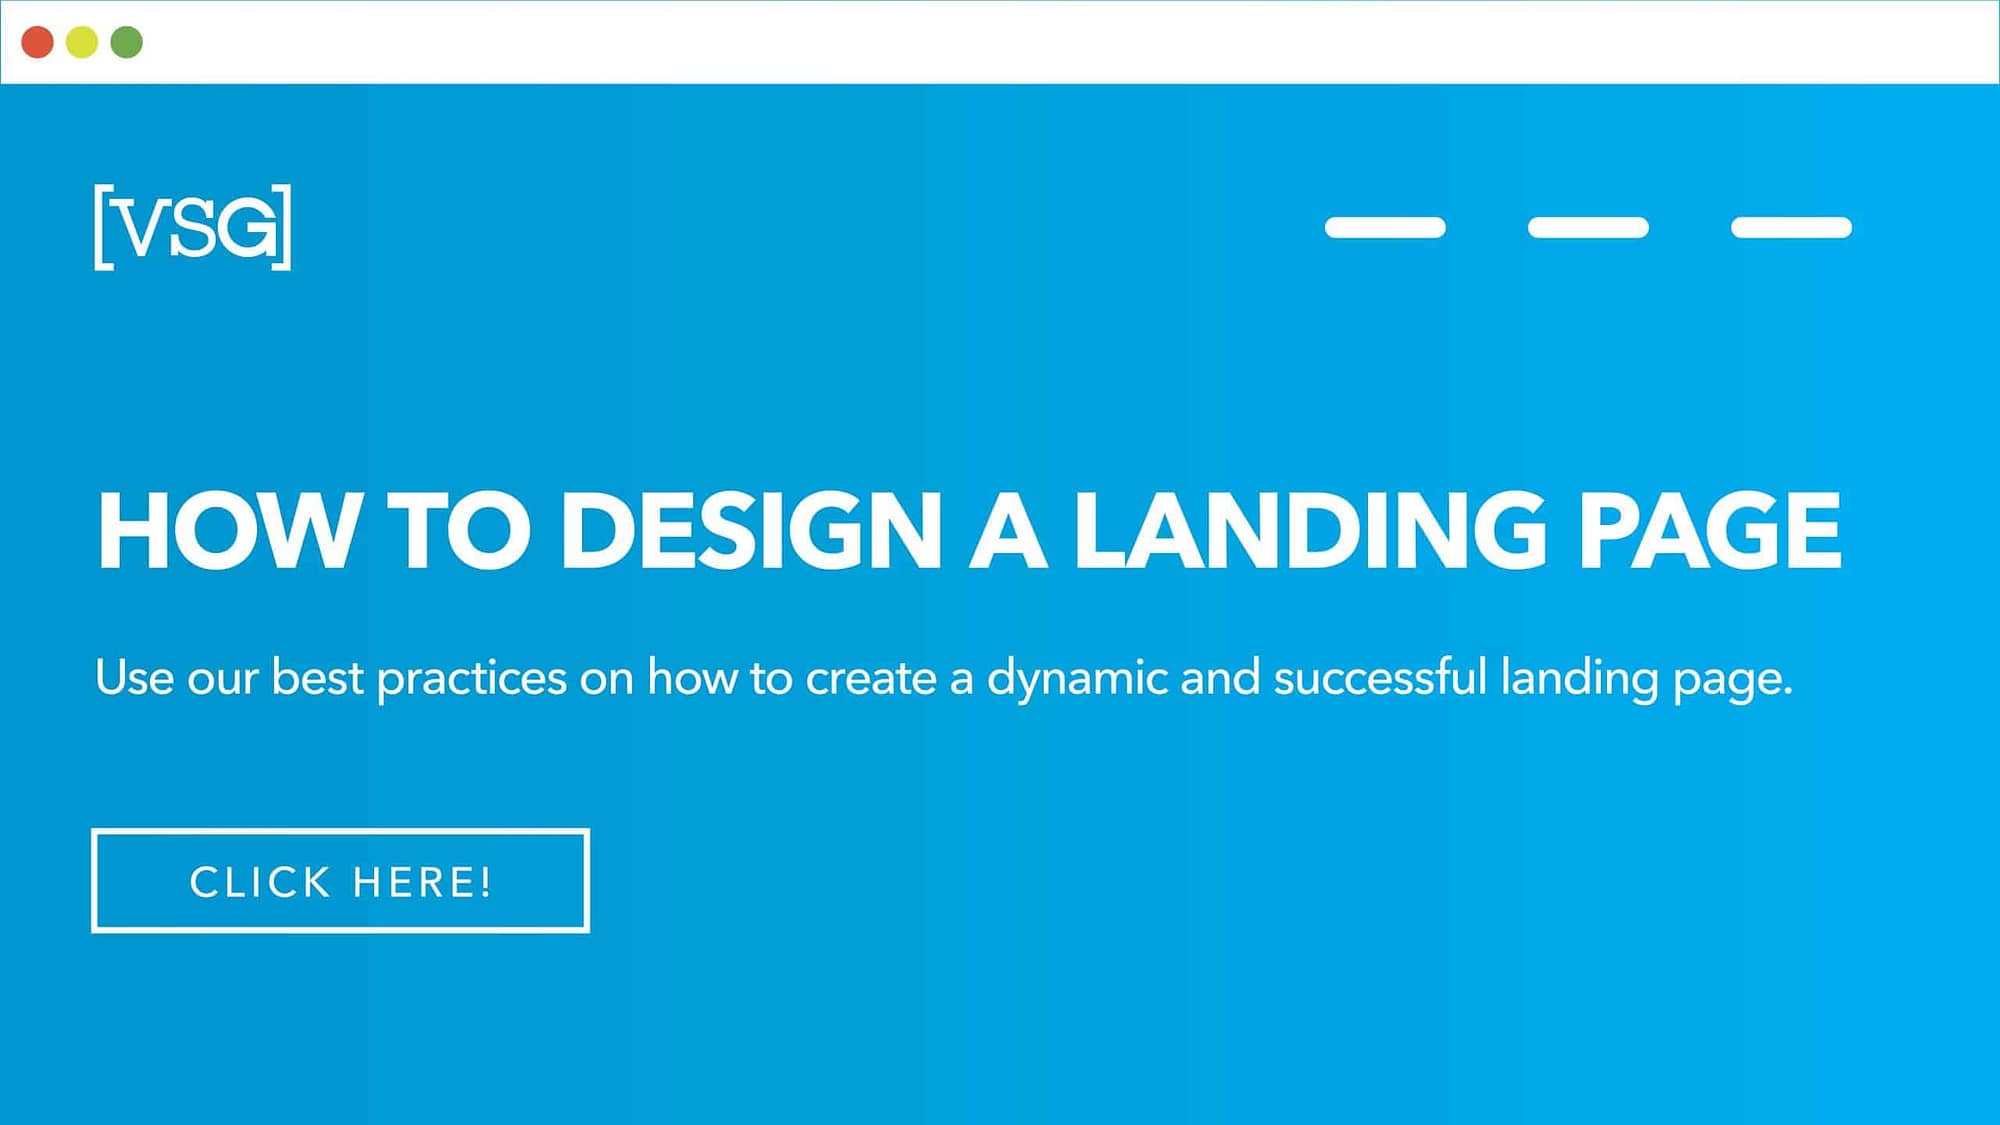 How to design a landing page. Use our best practices on how to create a dynamic and successful landing page.